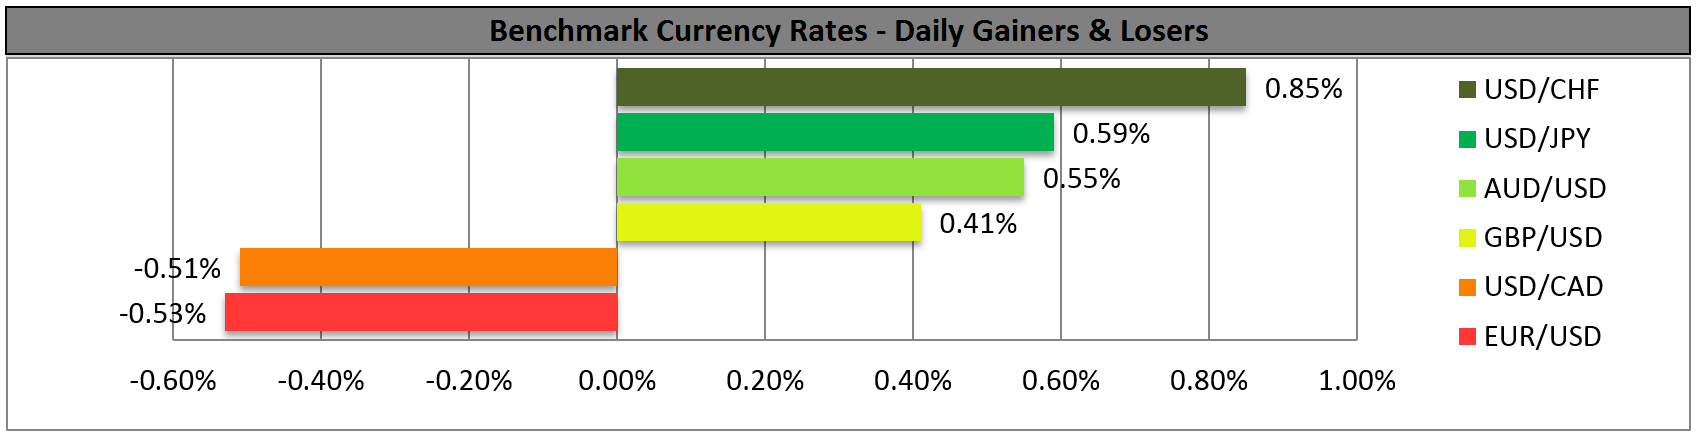 Benchmarks Rates